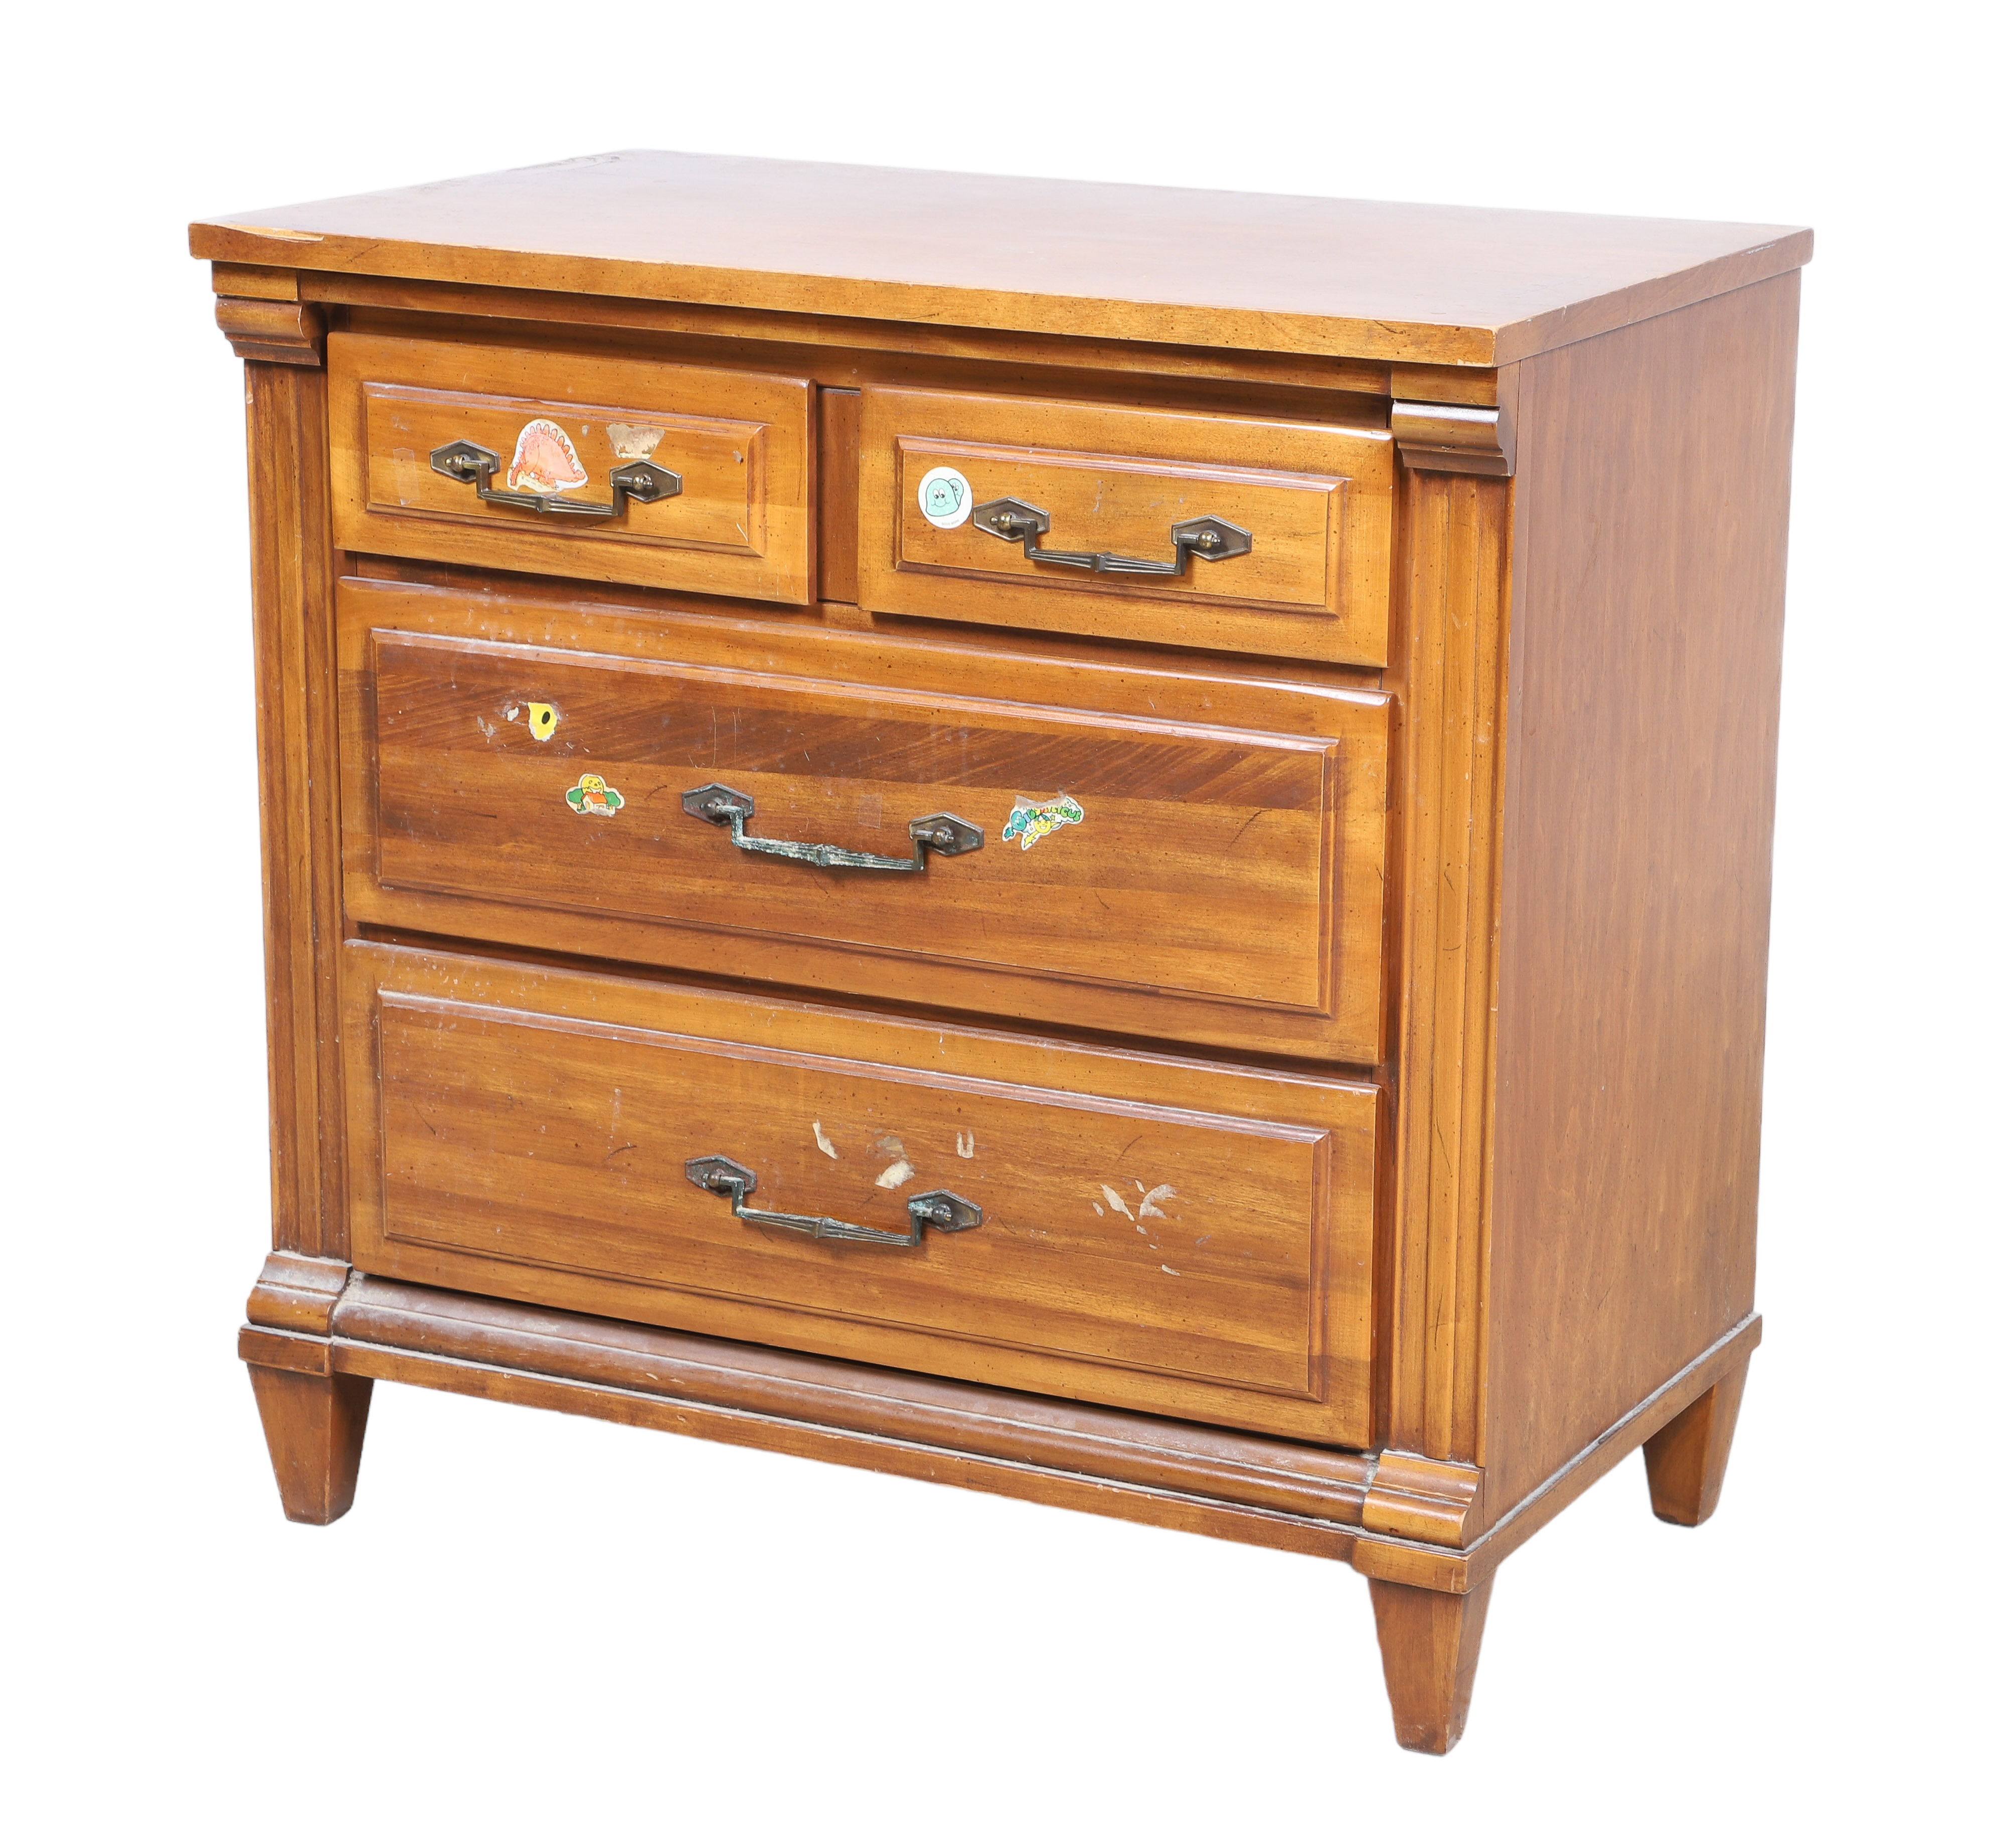 Mahogany chest of drawers, two short